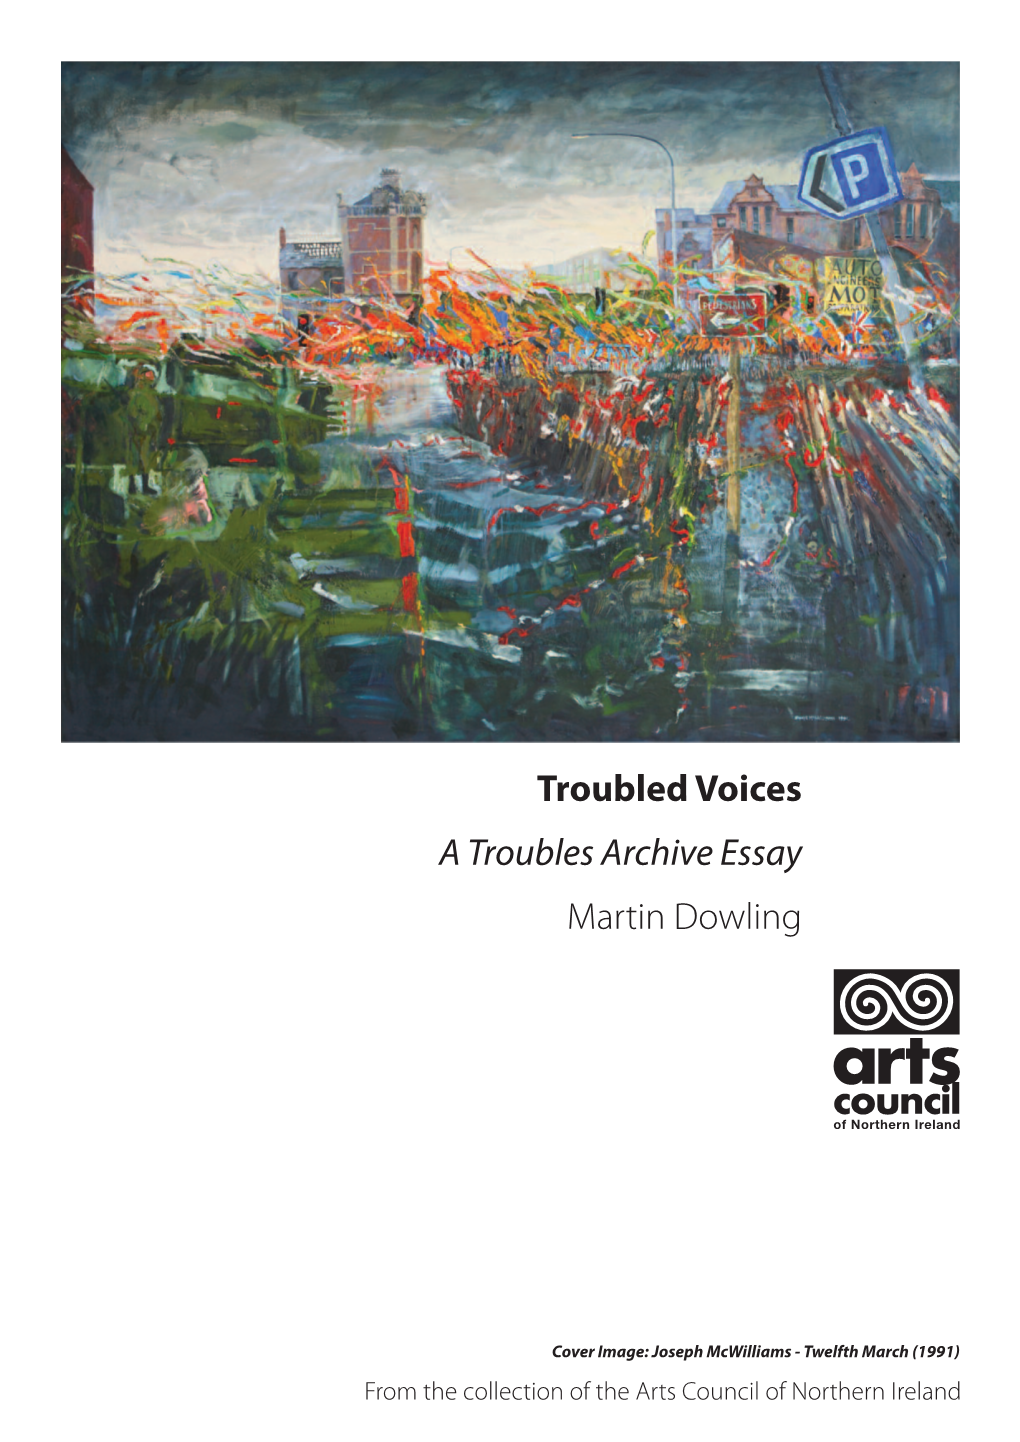 Troubled Voices Martin Dowling a Troubles Archive Essay